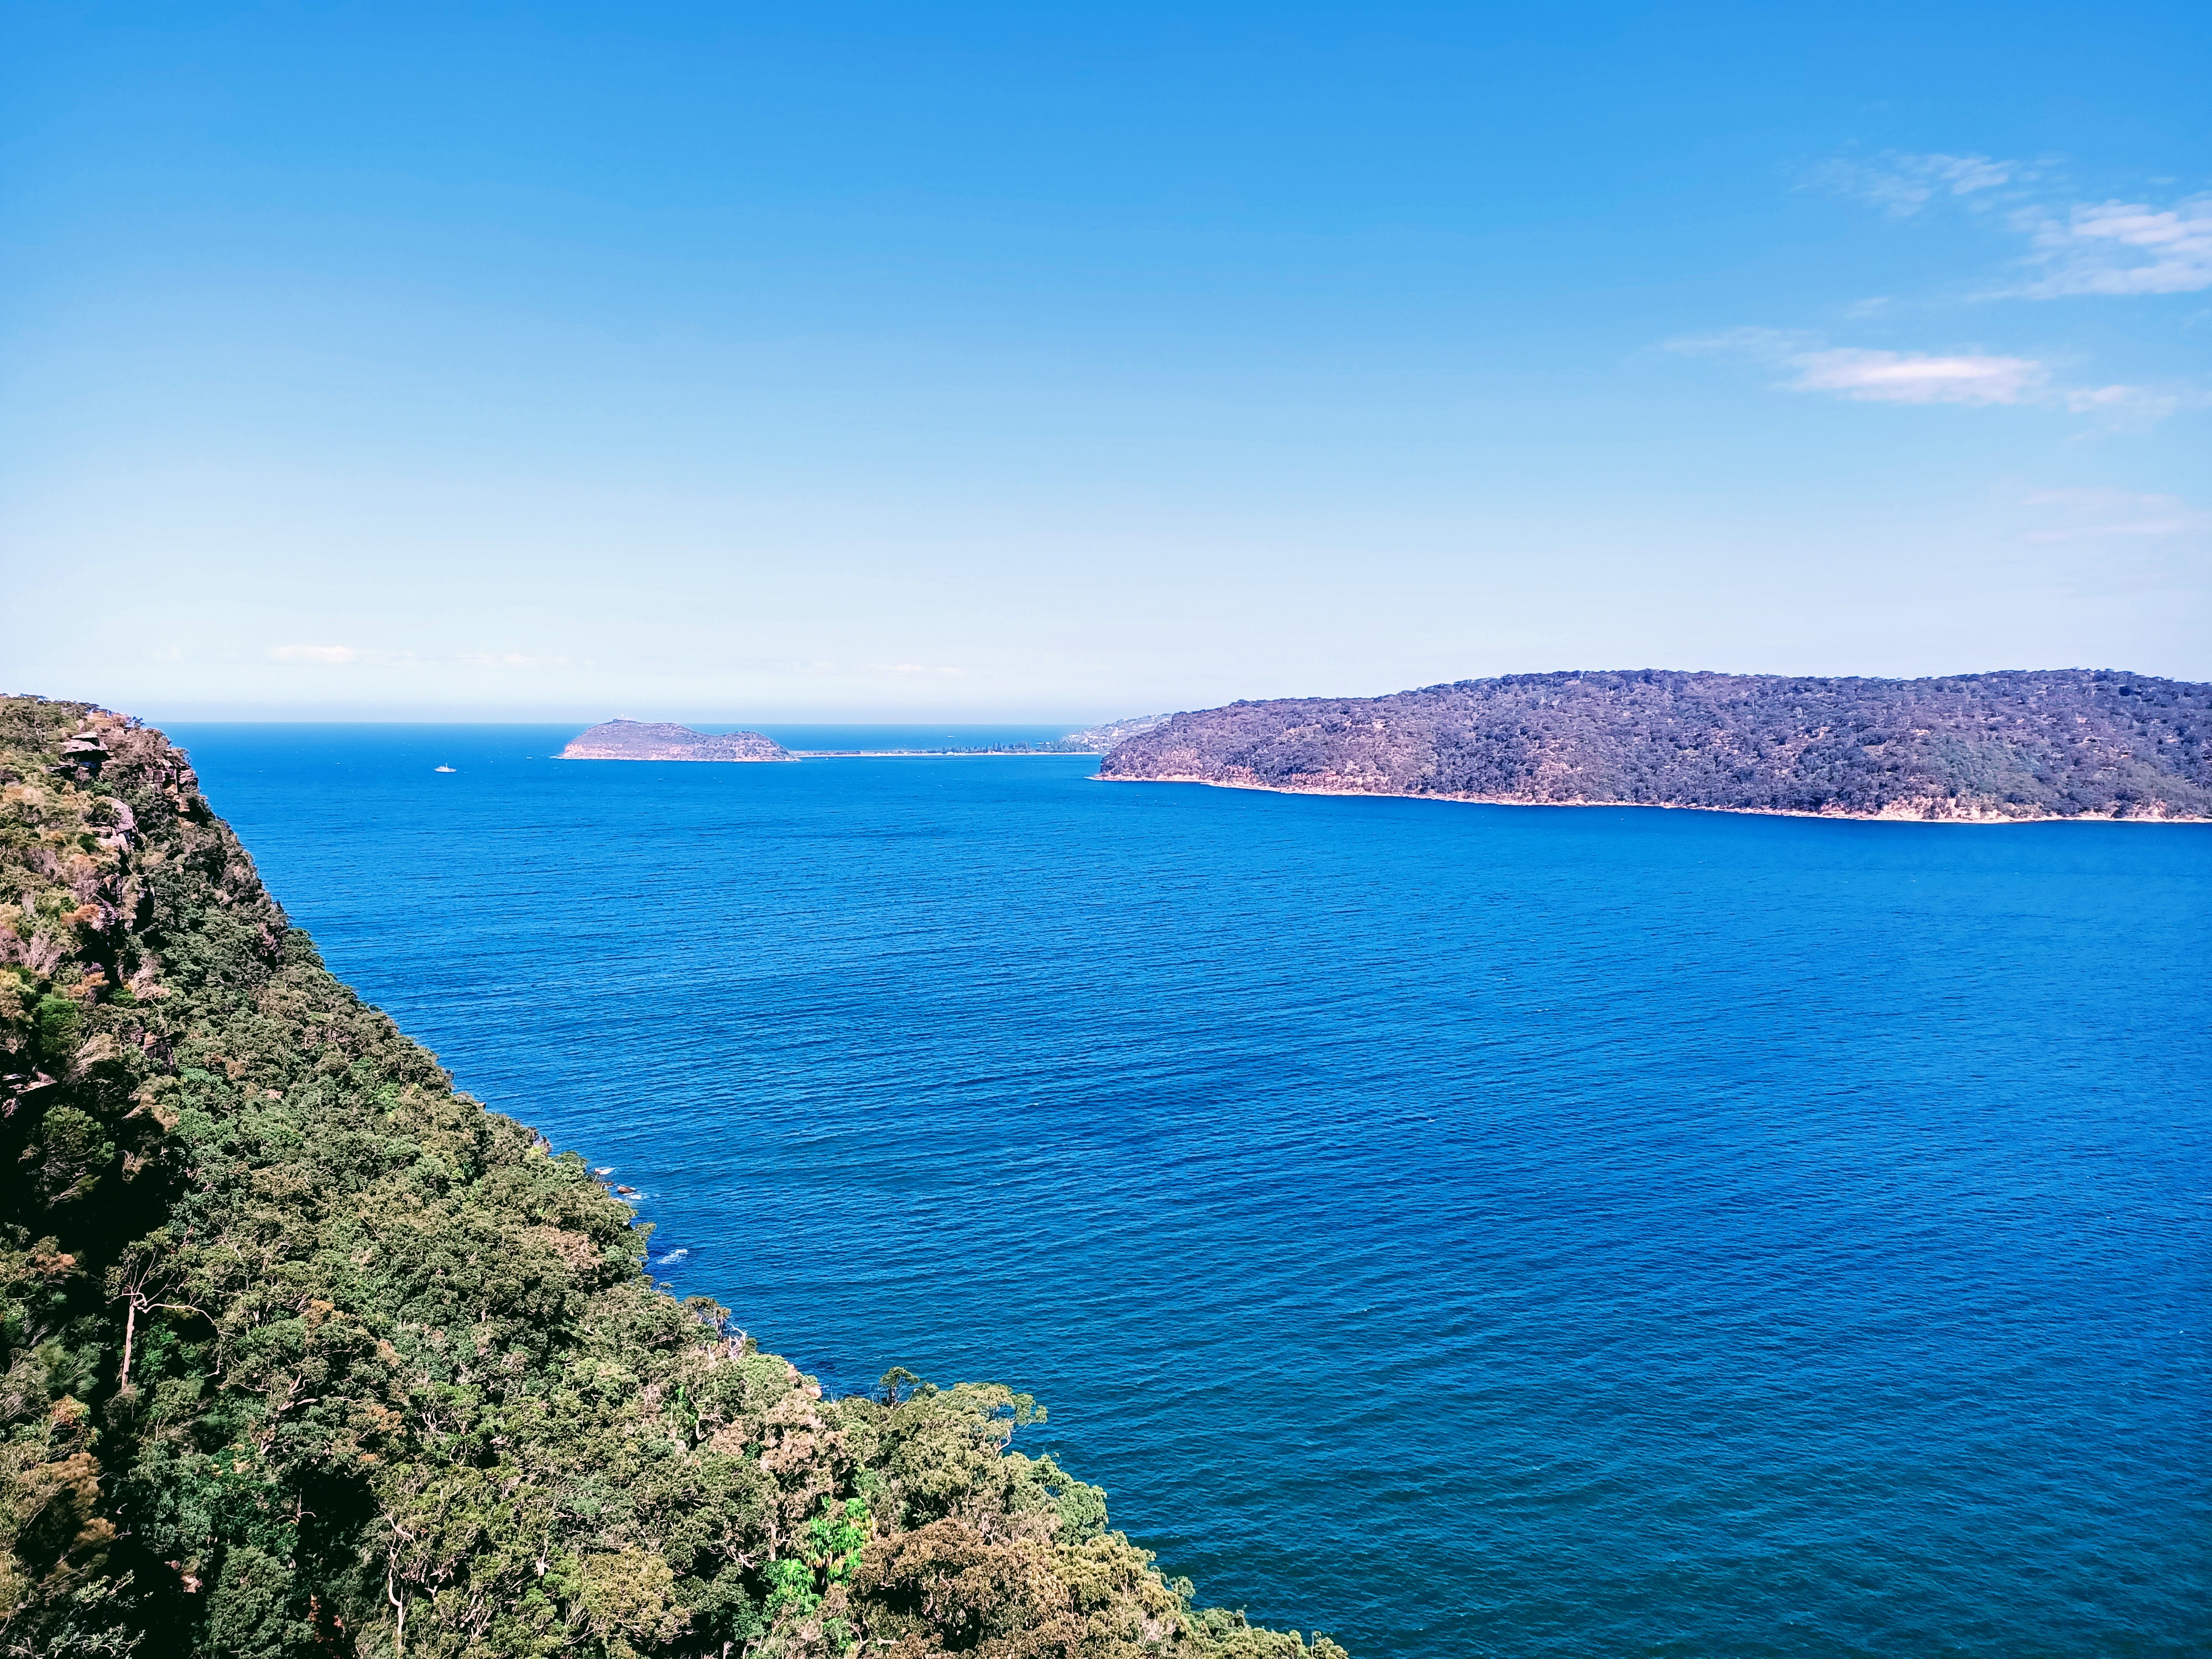 Barrenjoey Lighthouse and North Palm Beach, viewed from the Central Coast, during the pandemic of 2020!